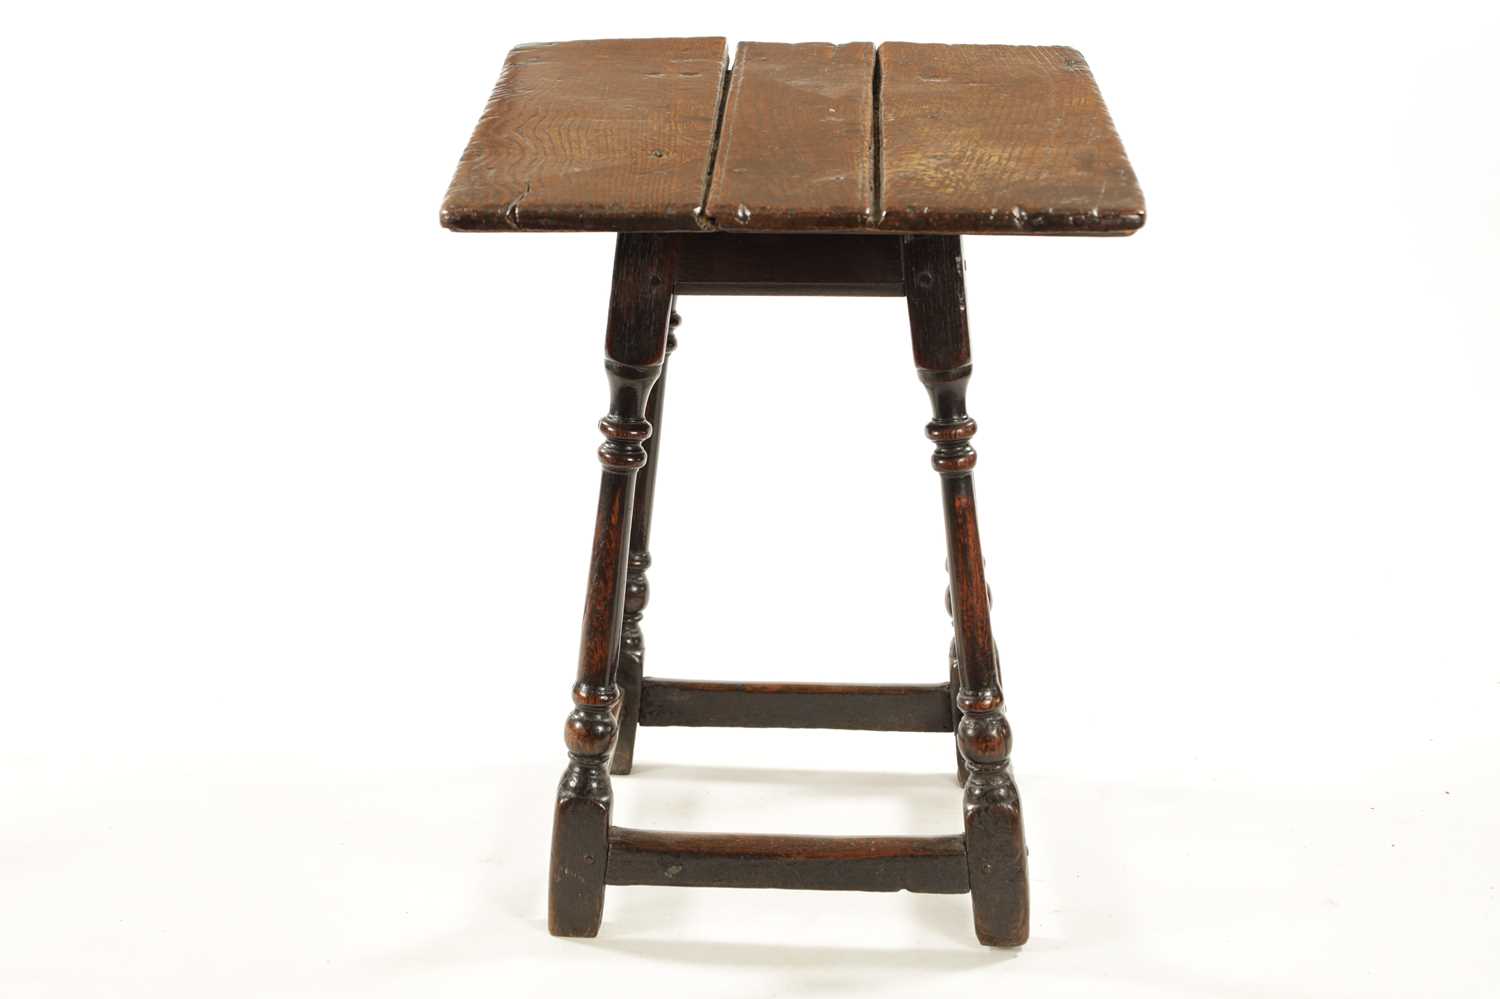 A LATE 17TH CENTURY OAK RECTANGULAR SMALL TABLE - Image 6 of 6